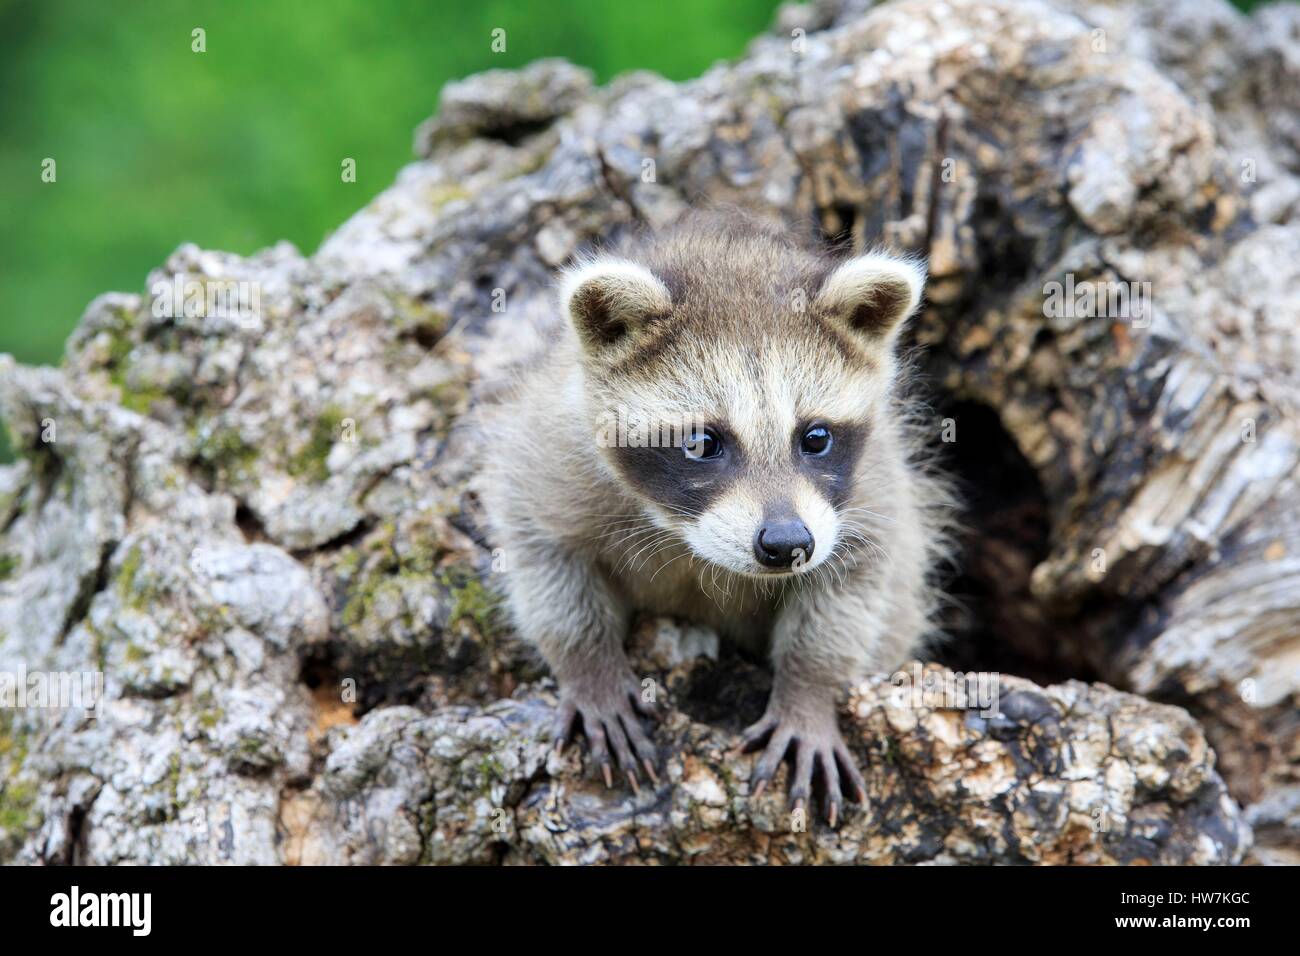 United States, Minnesota, Raccoon or racoon (Procyon lotor), youngs Stock Photo